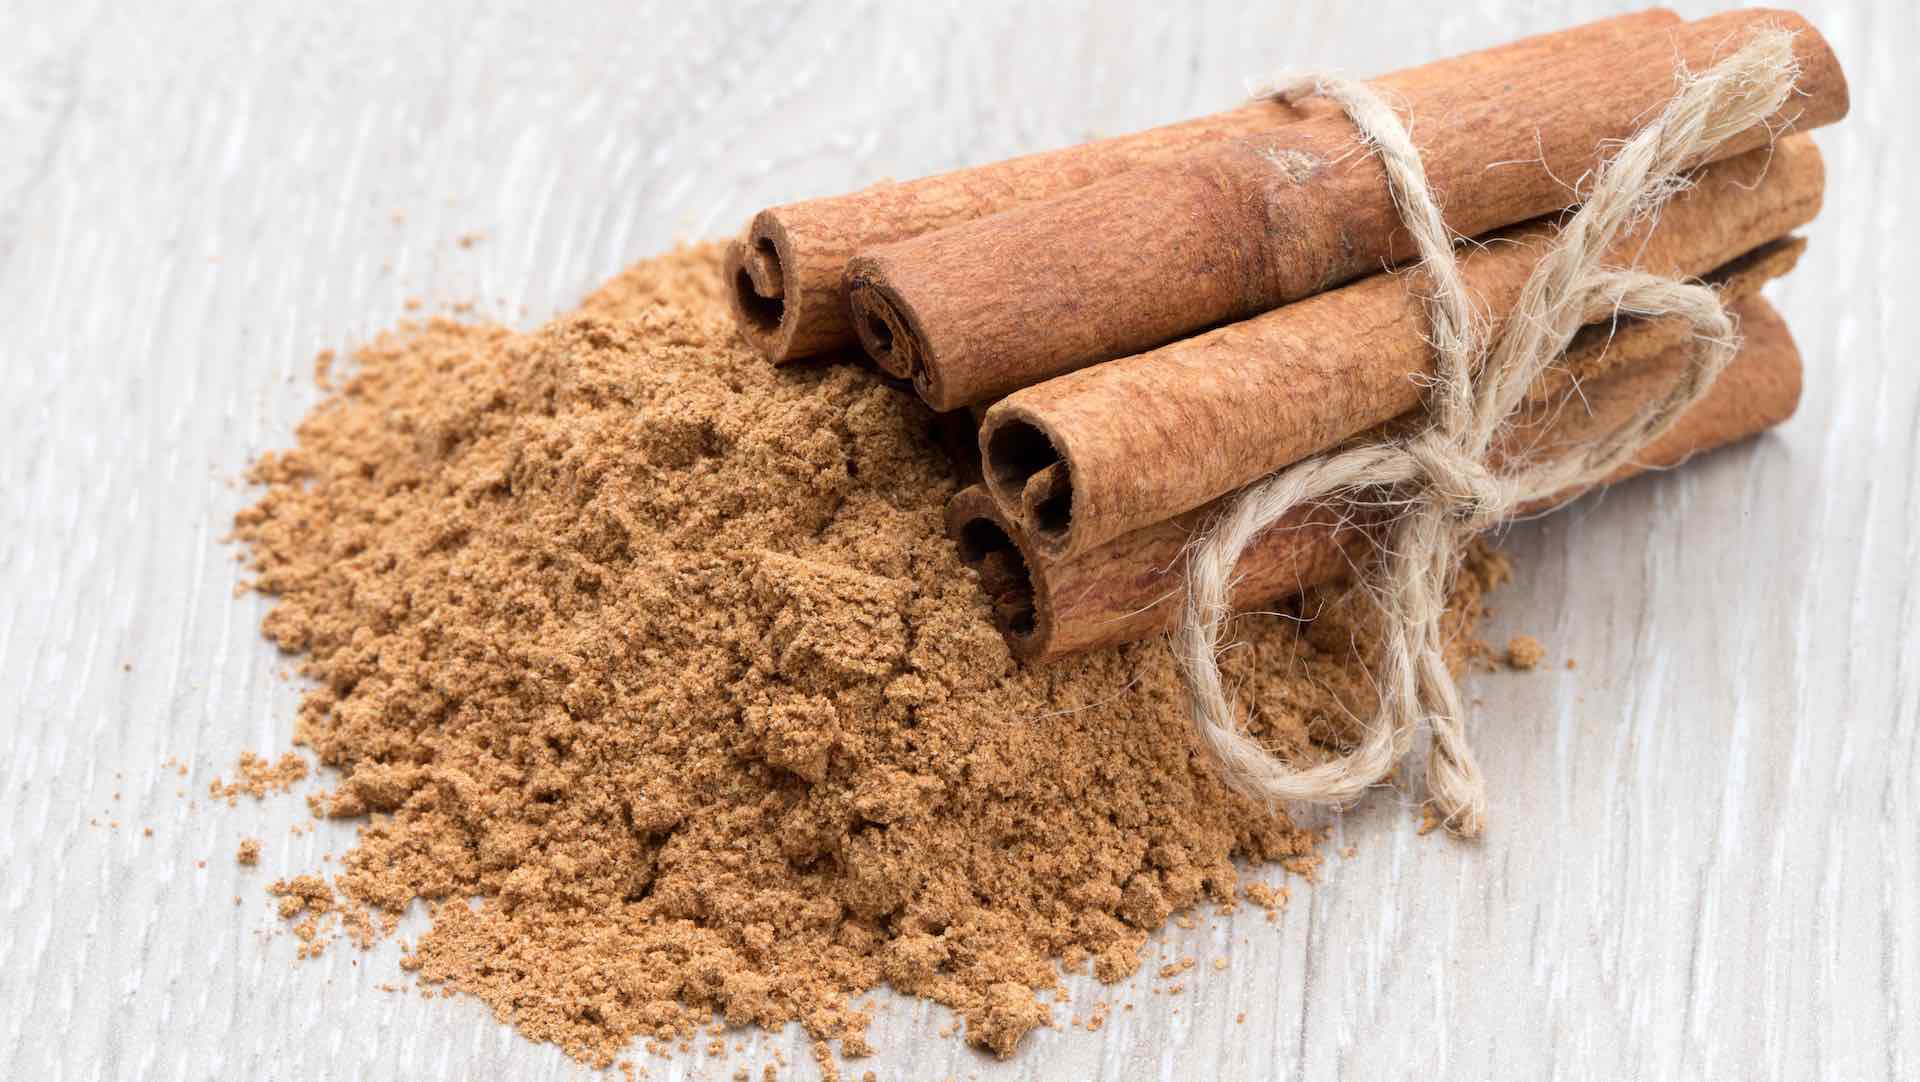 FDA finds lead contamination in ground cinnamon products